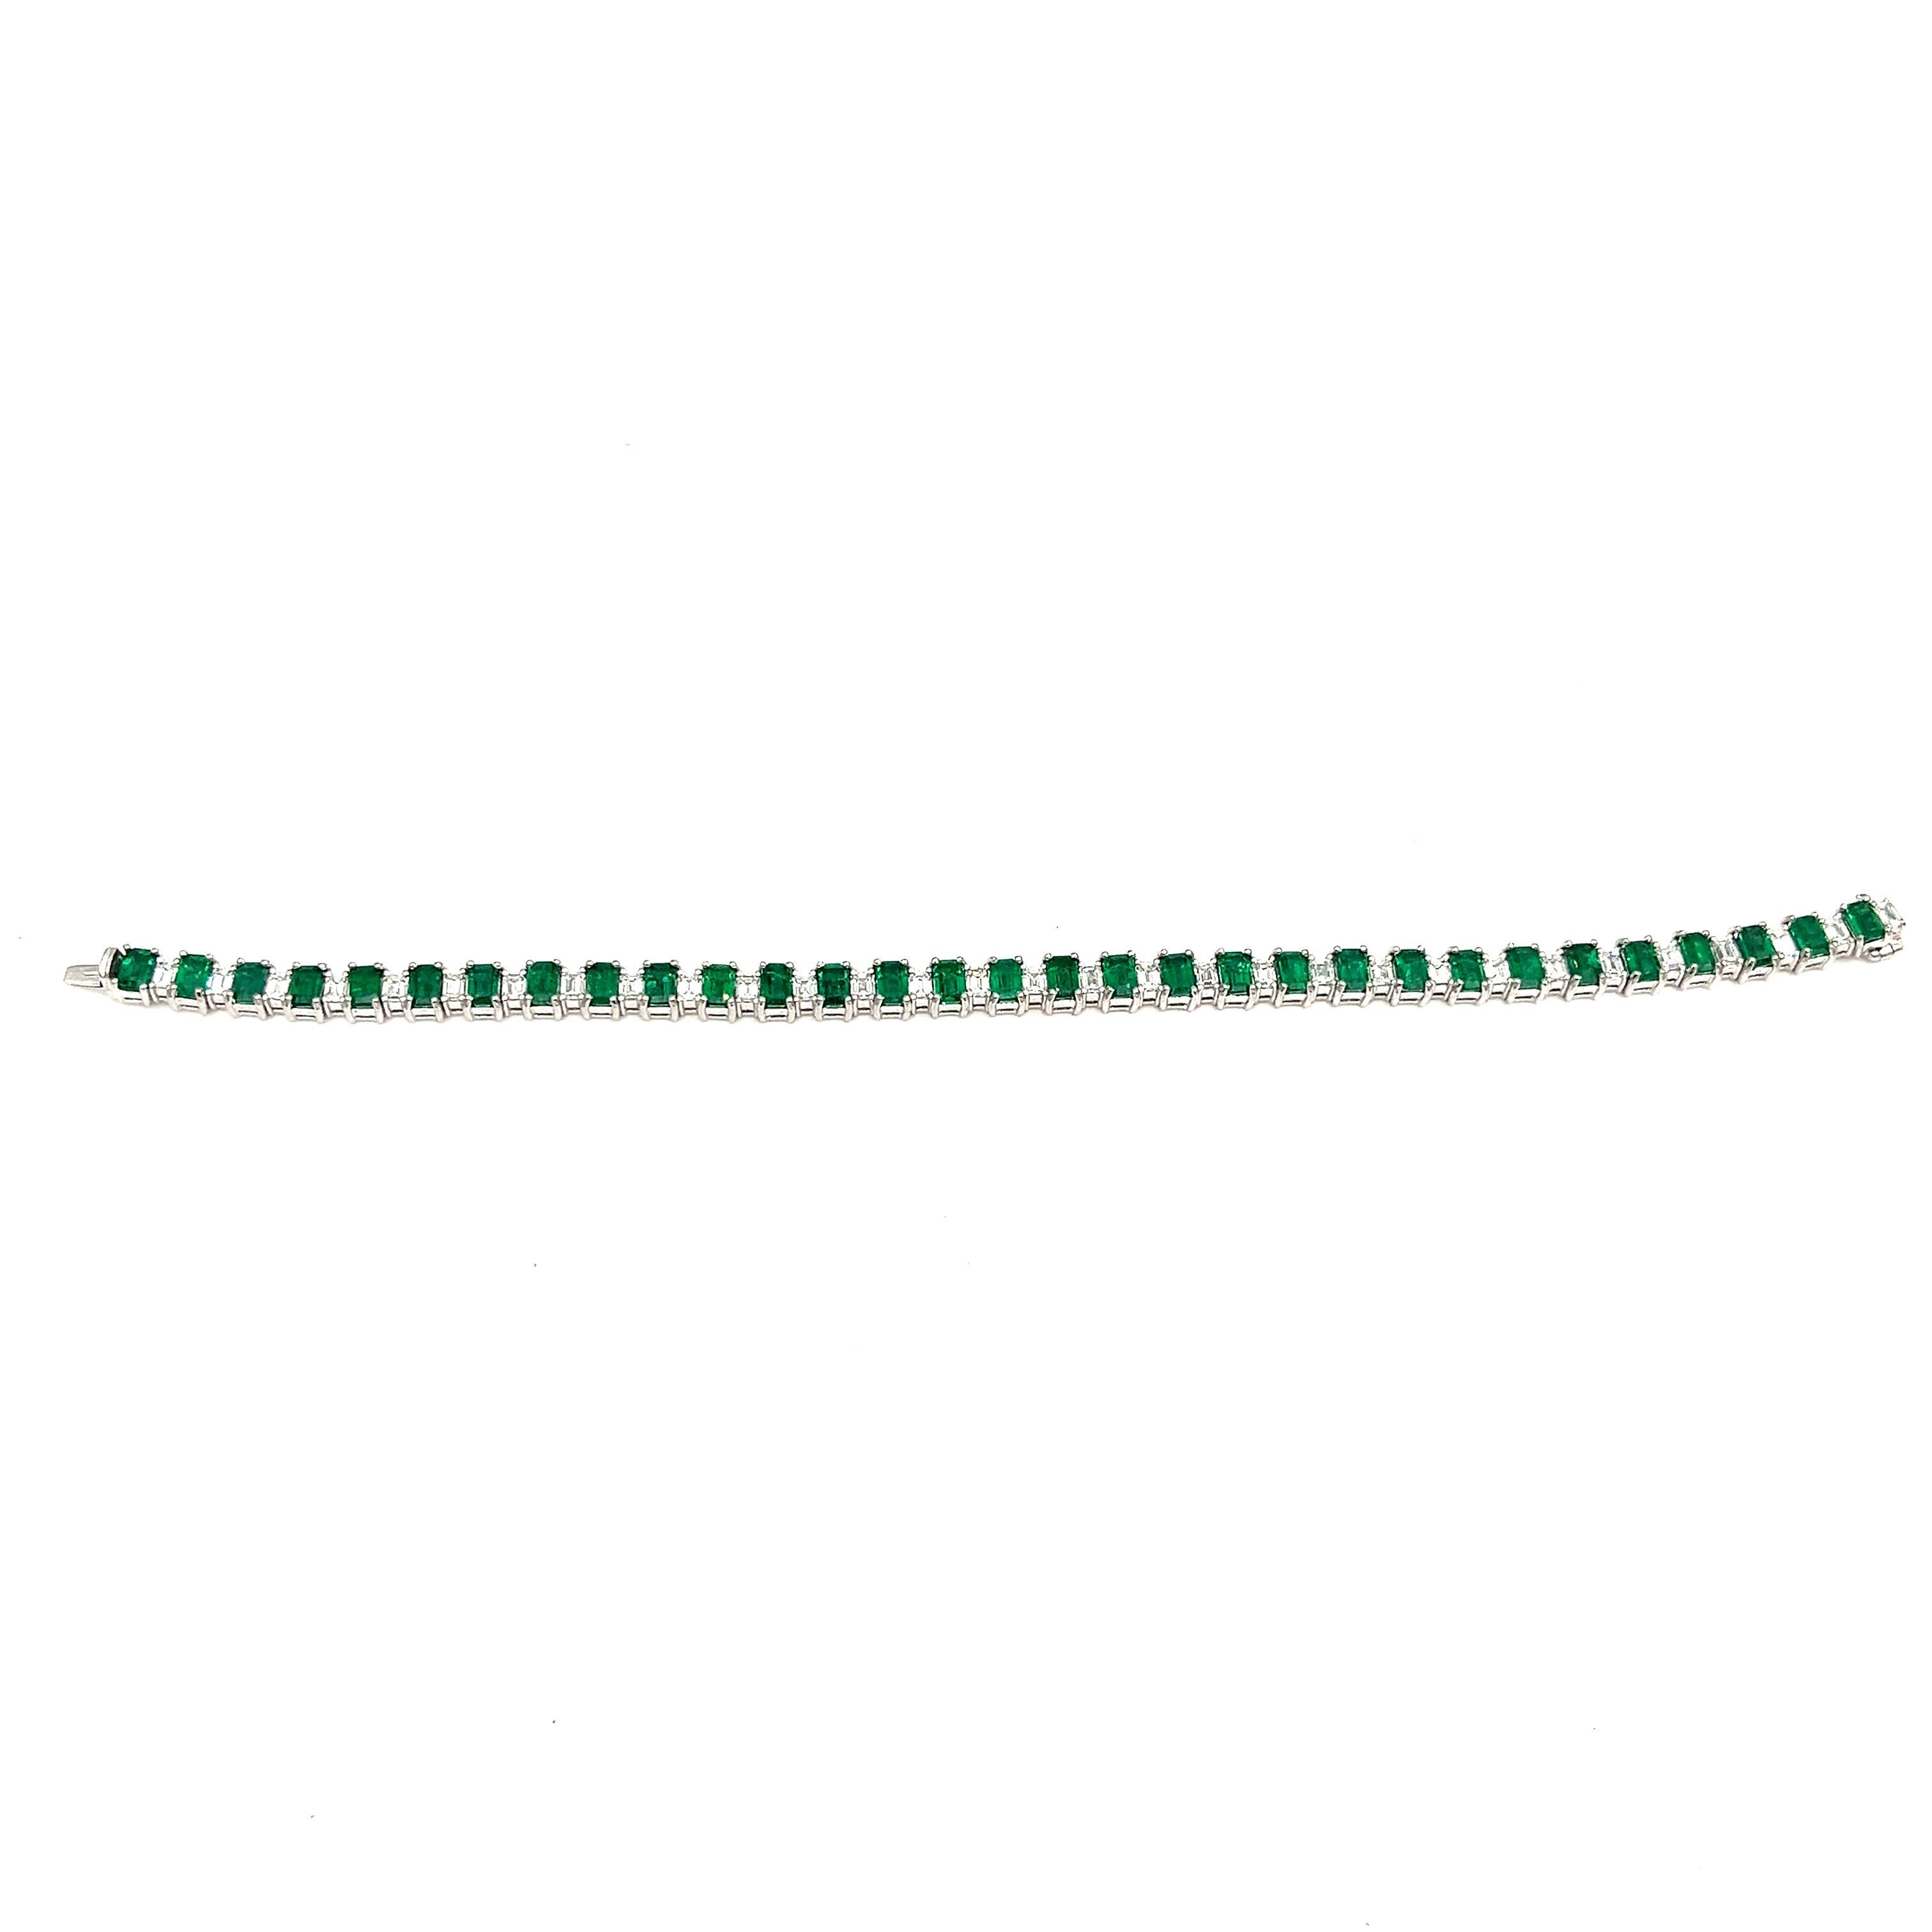 This bracelet features 31 natural emerald cut emeralds weighing 8.75 ct. The bracelet also features 31 baguette-shaped diamonds weighing 3.50 ct and are graded E/F in color and VVS2/VS1 in clarity. The bracelet is 7 inches long and is set in